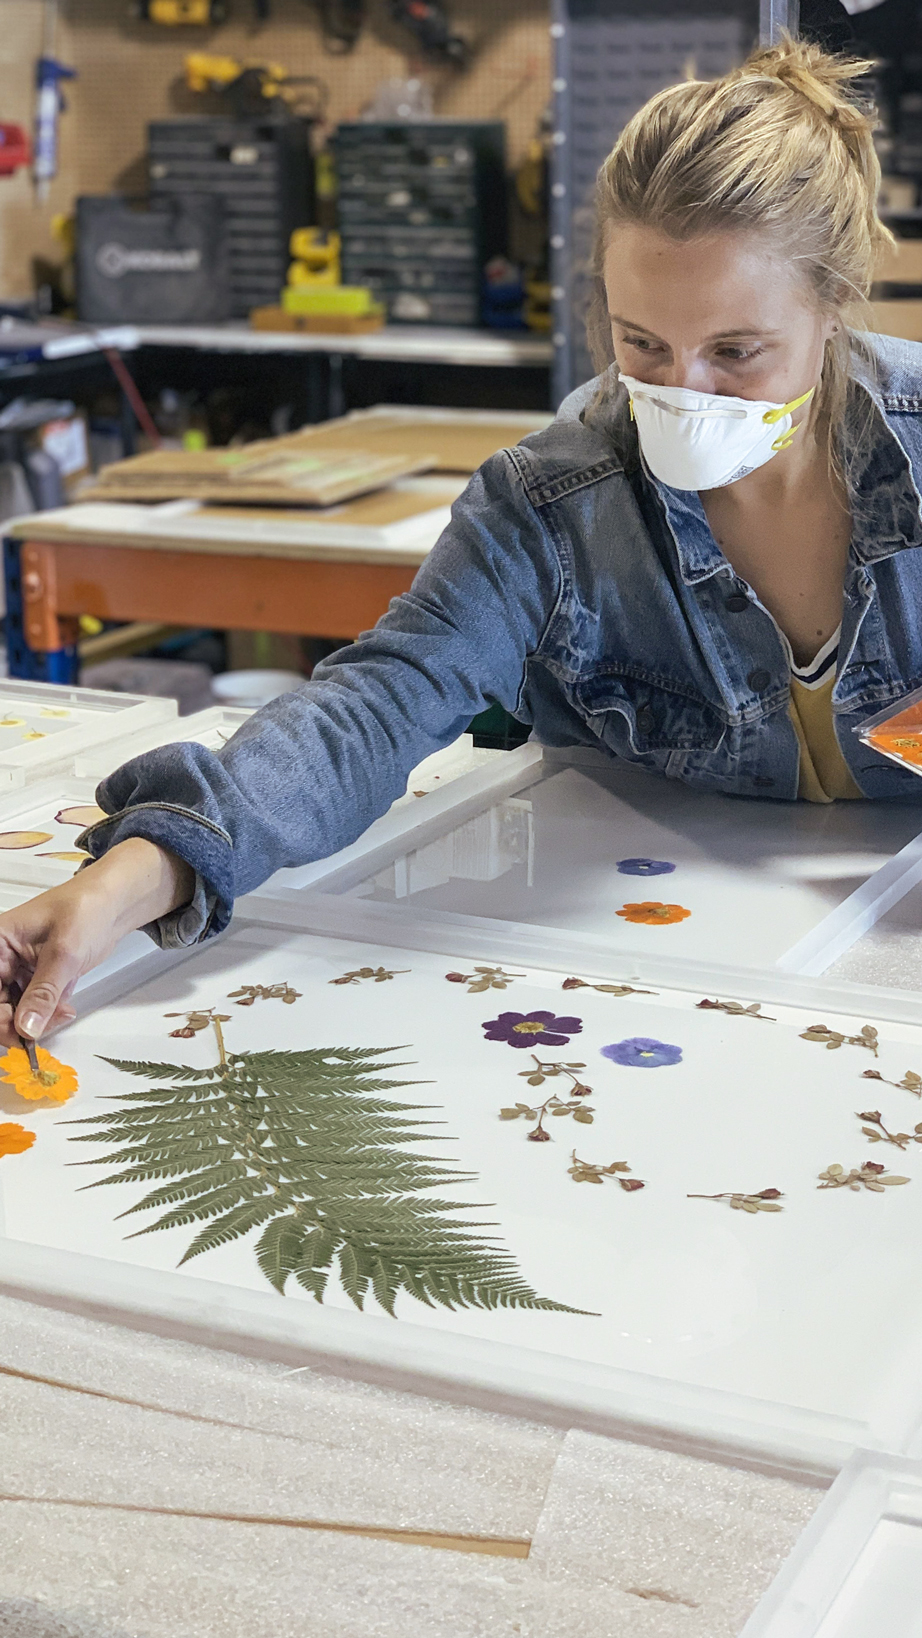 Designer pressing florals and leaves for an installation